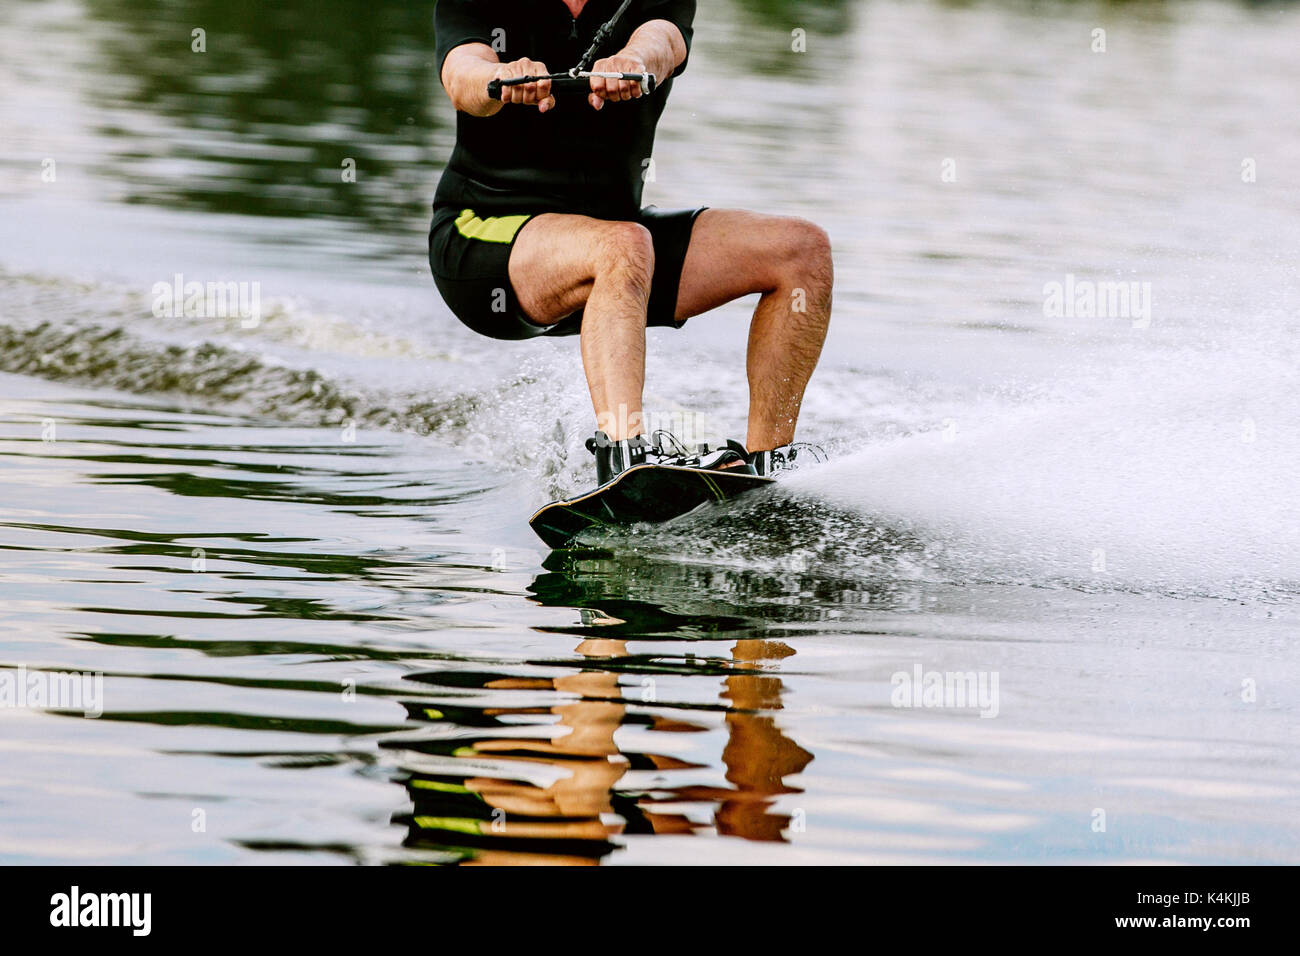 wakeboarding on lake summer recreation in nature Stock Photo